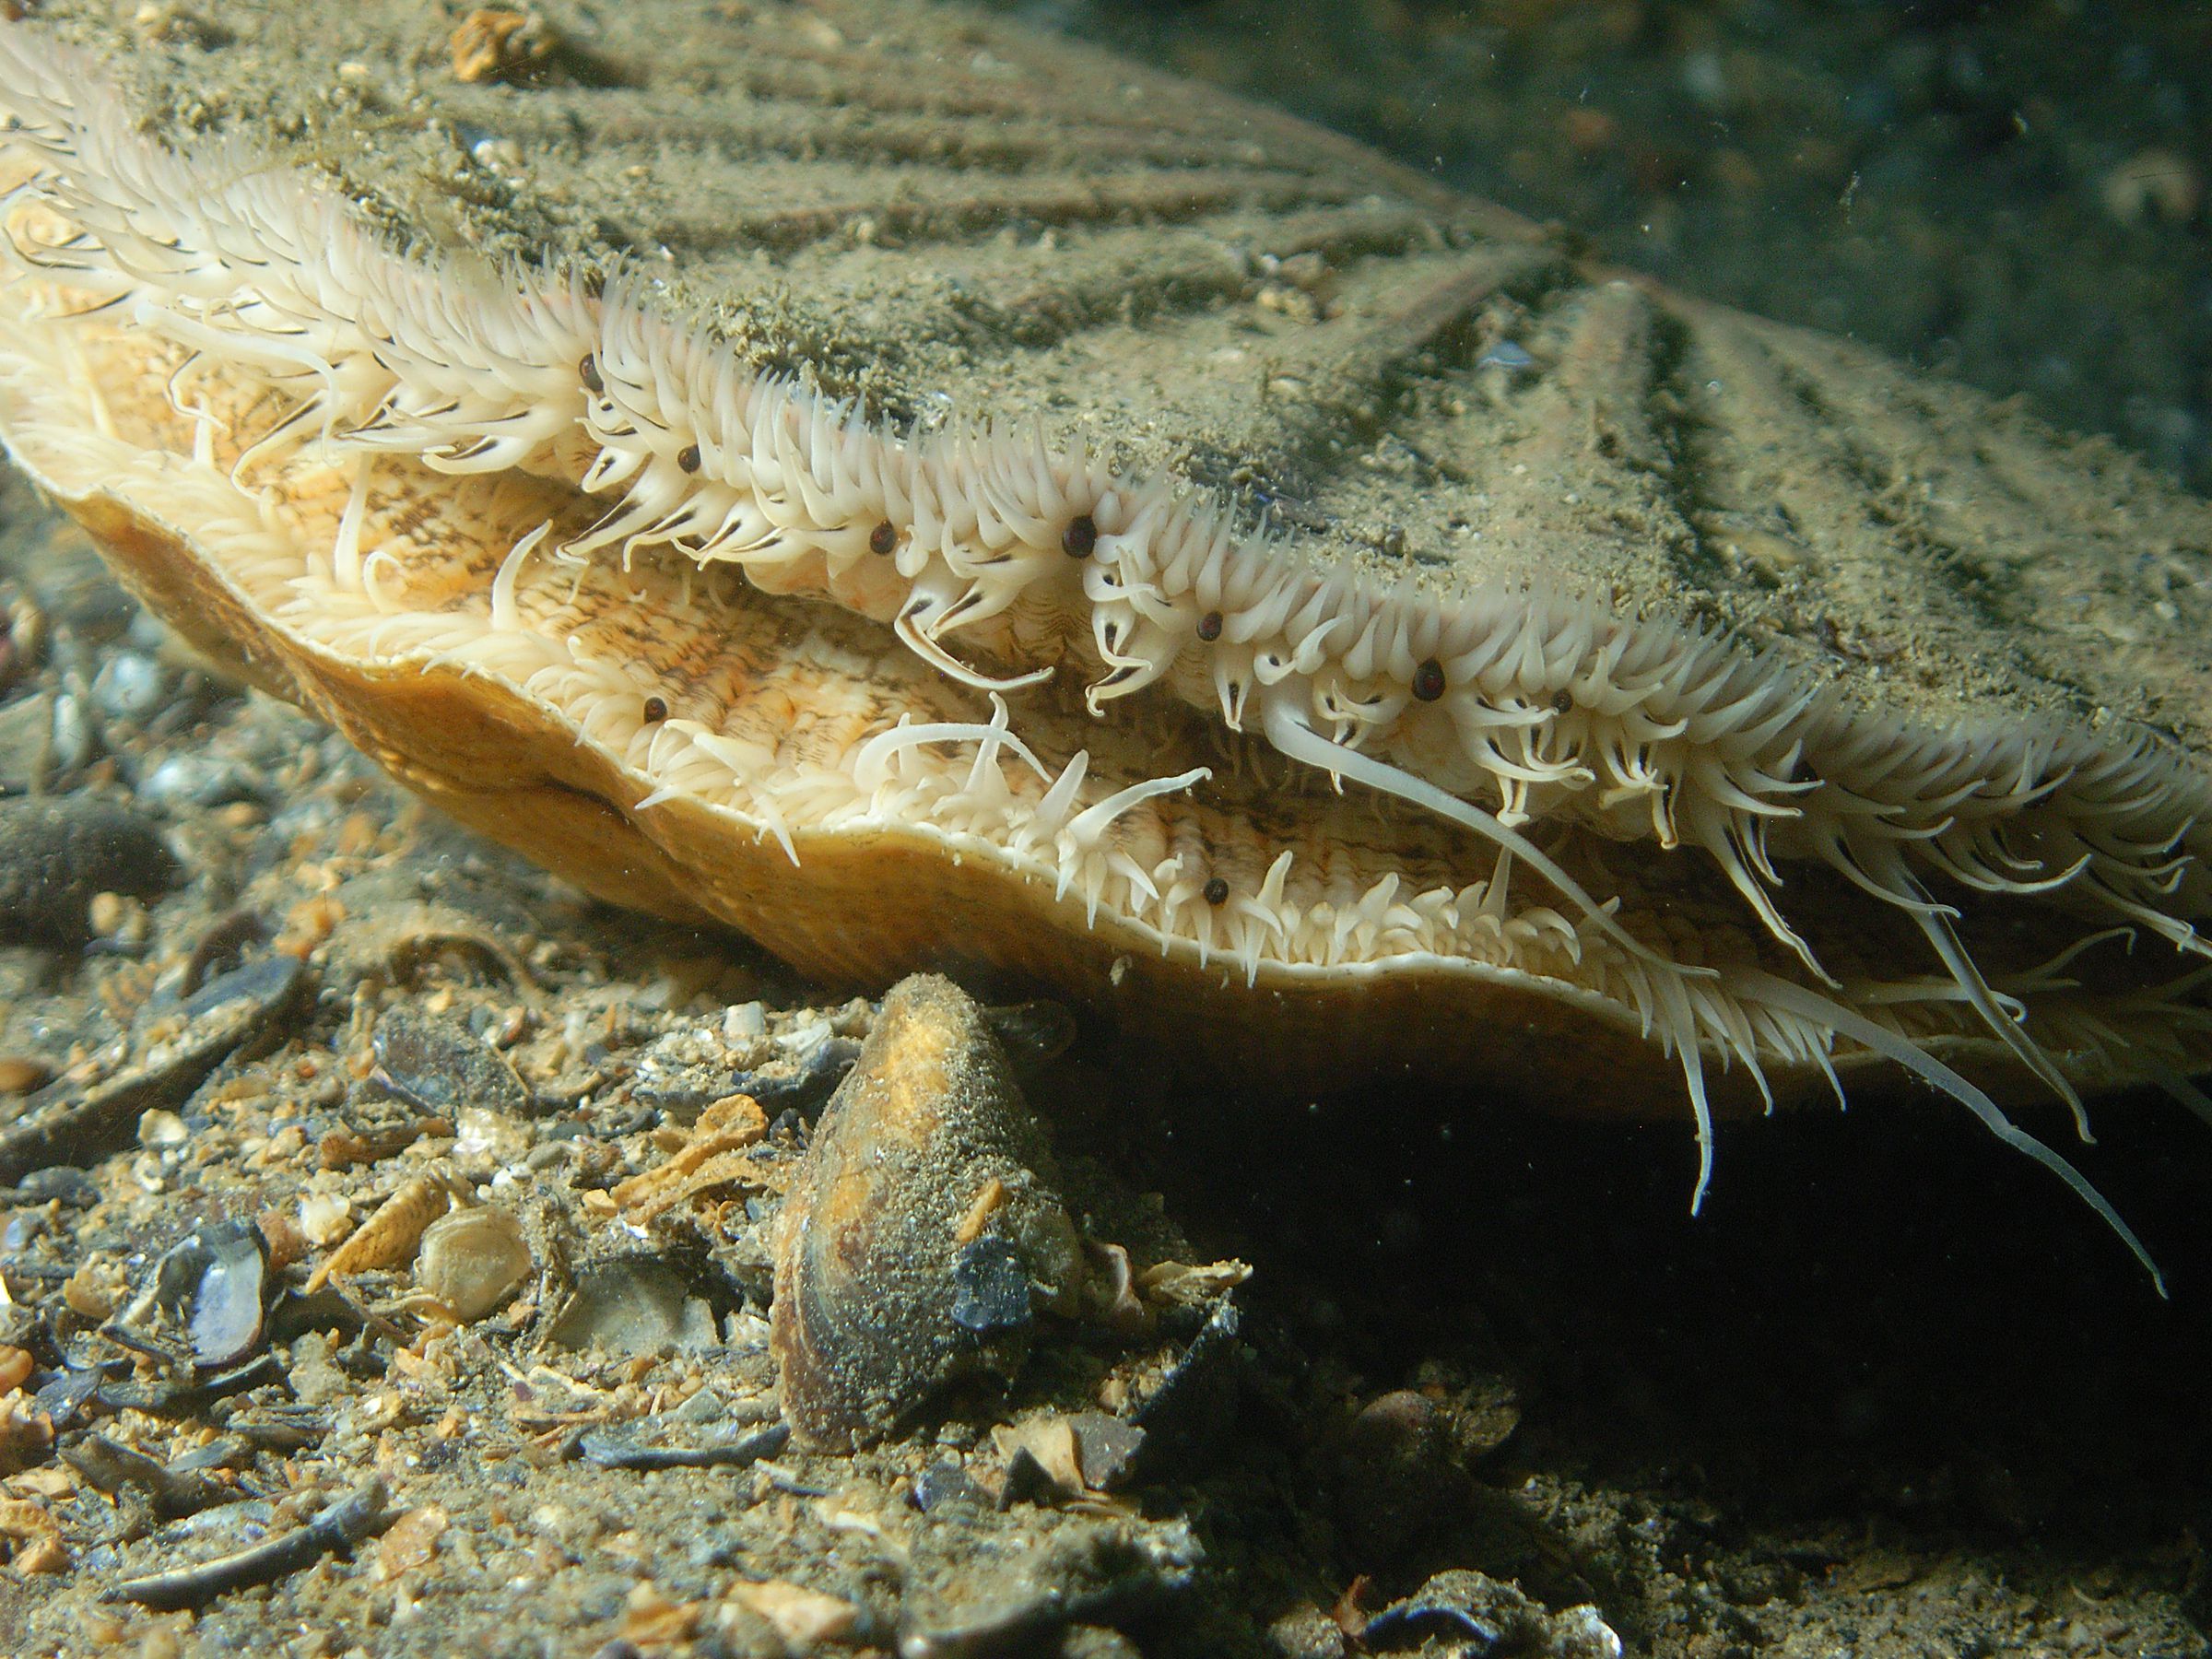 The tiny black dots are the eyes of this king scallop.